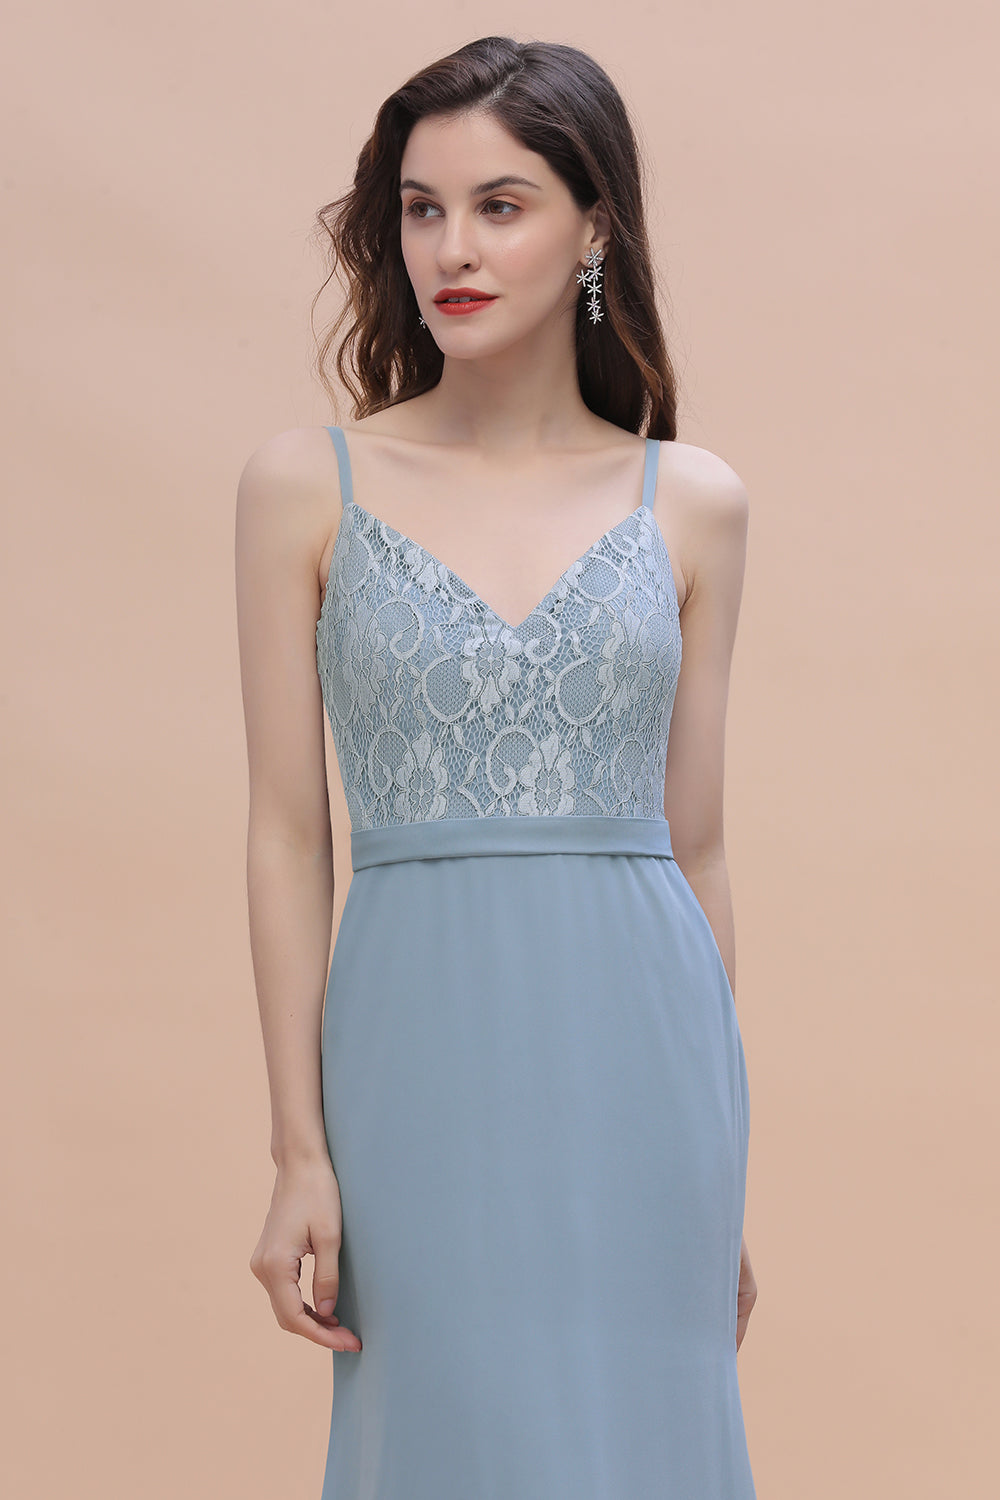 Load image into Gallery viewer, Simple Long Mermaid V-neck Lace Open Back Chiffon Bridesmaid Dress-BIZTUNNEL
